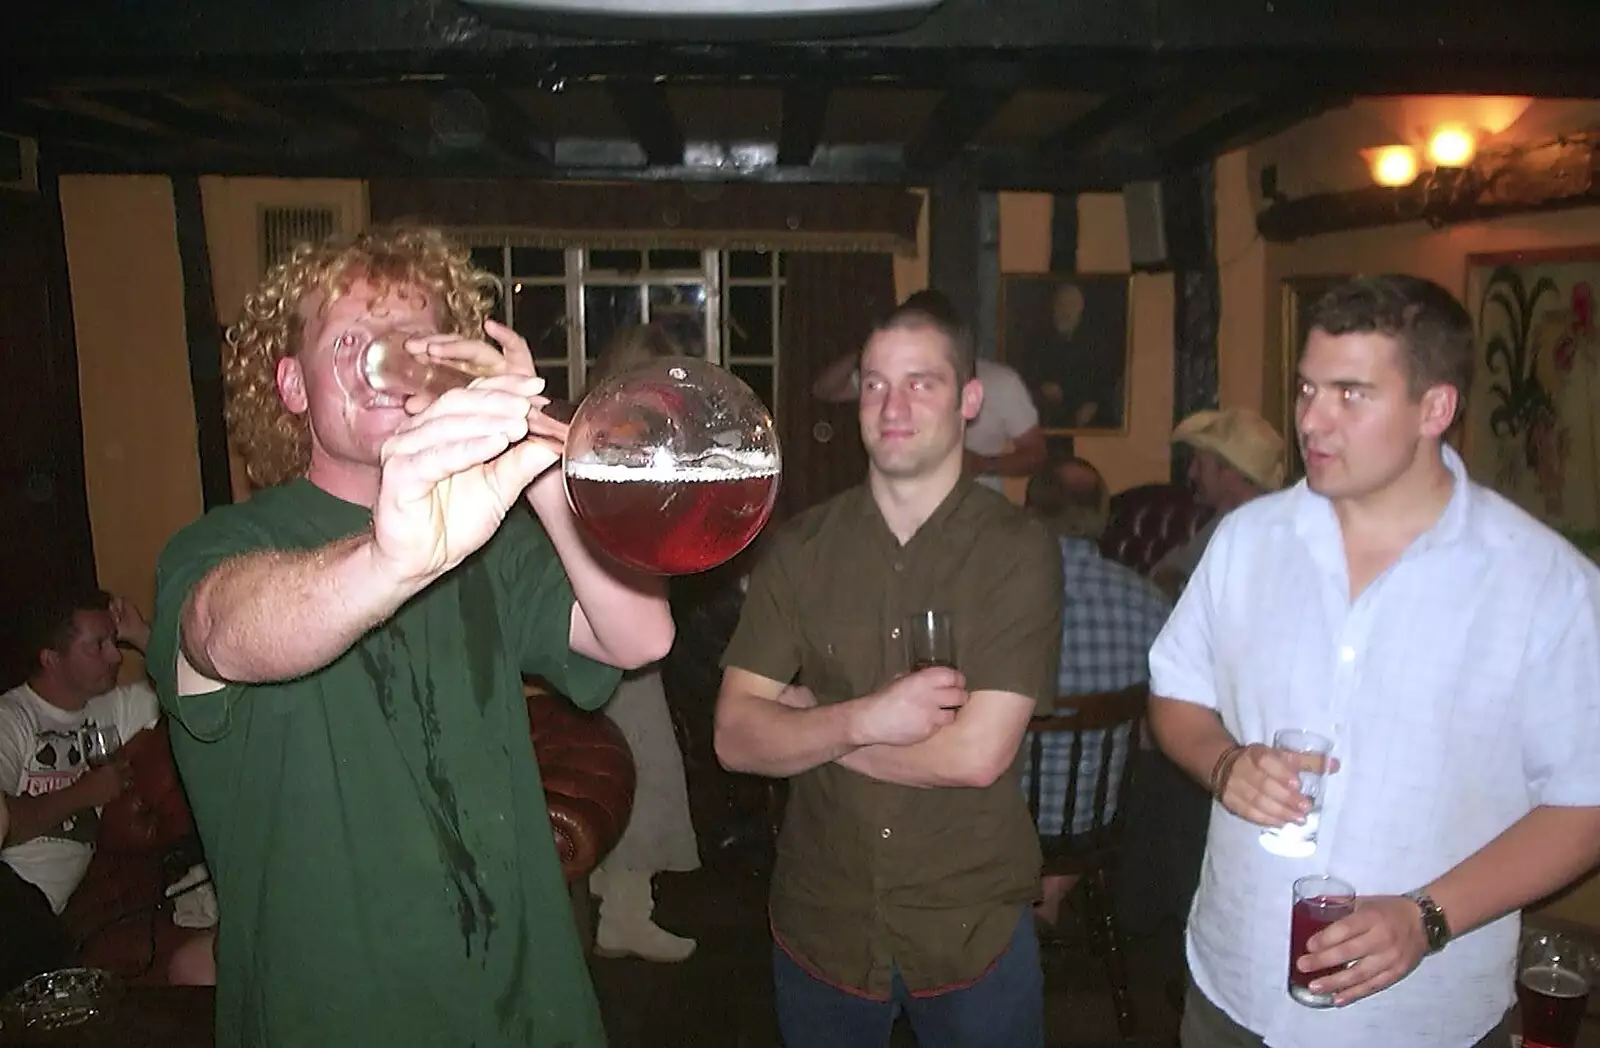 Wavy attempts the Yard, from Paul's Stag Night, Brome, Scole and Bressingham - Friday 20th August 2004